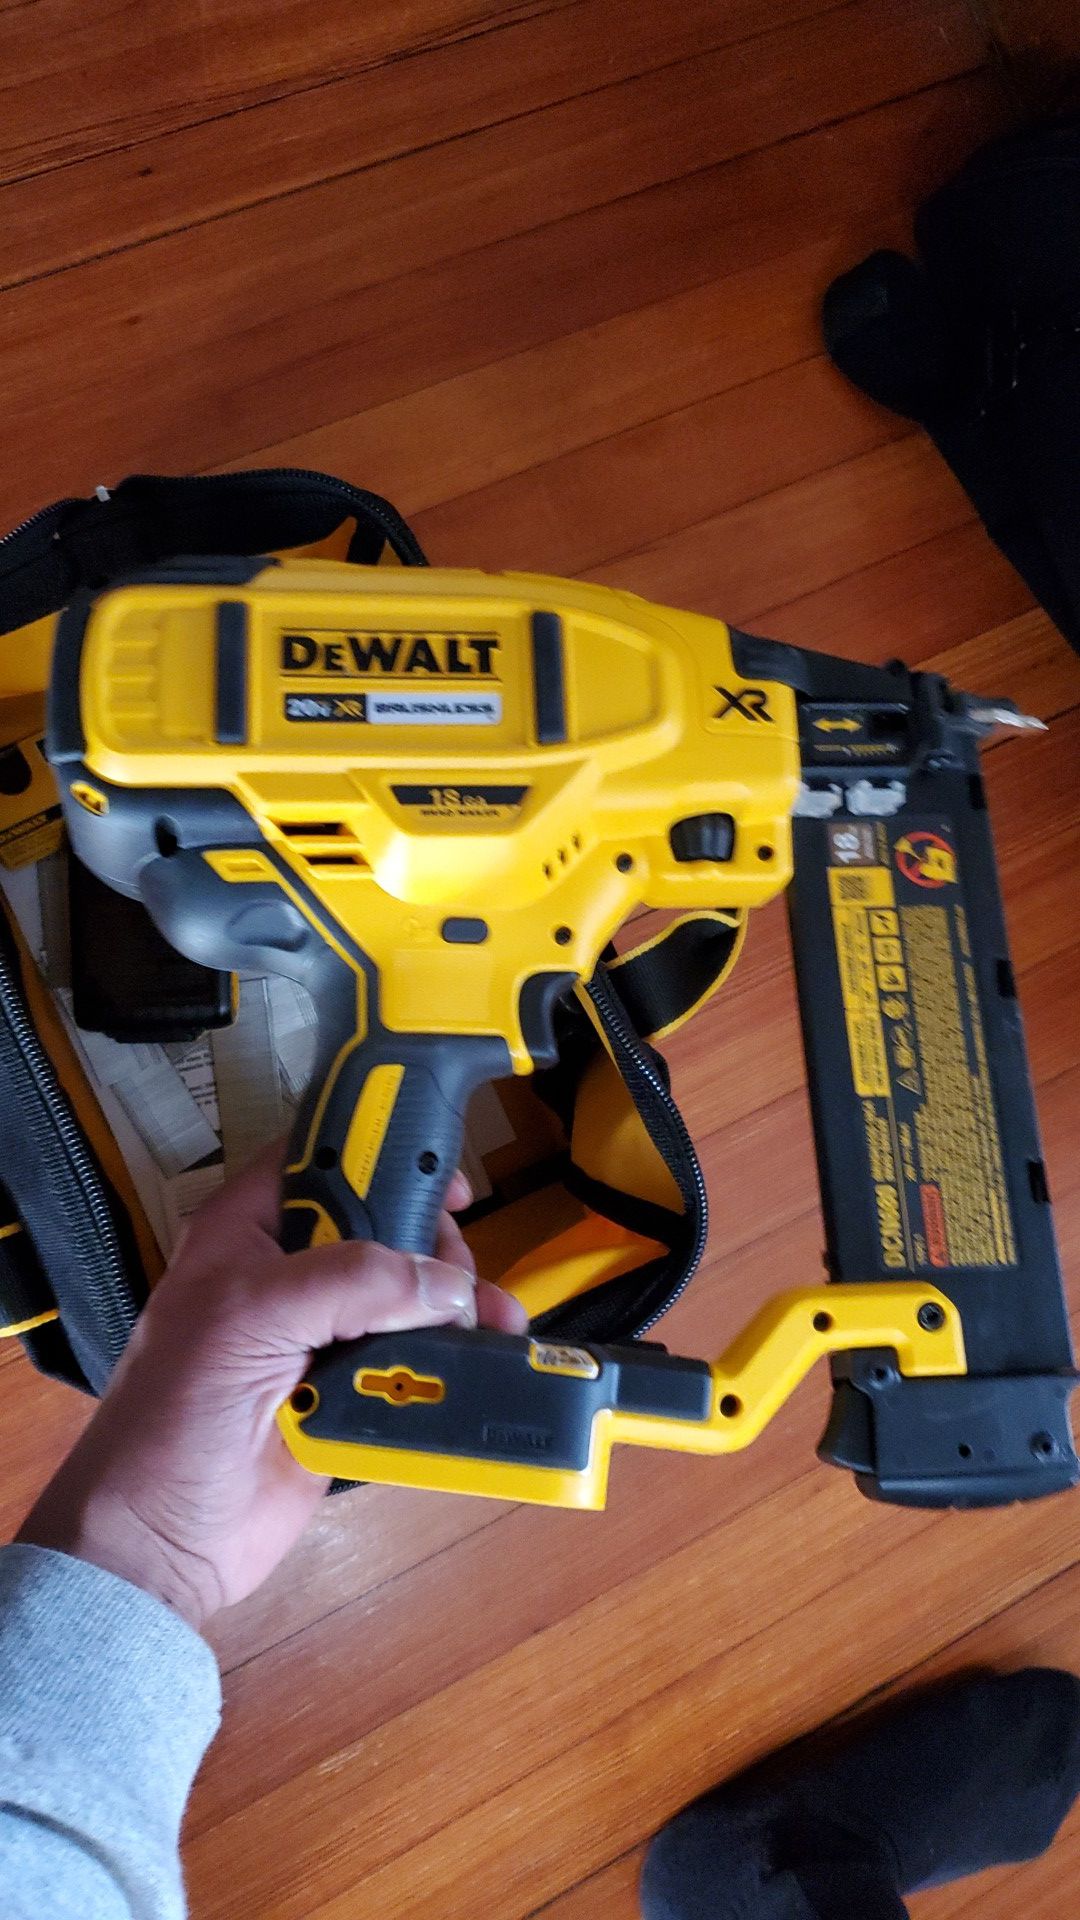 Dewalt bundle All still new just opened box (items all new Piece by Piece over 900$)